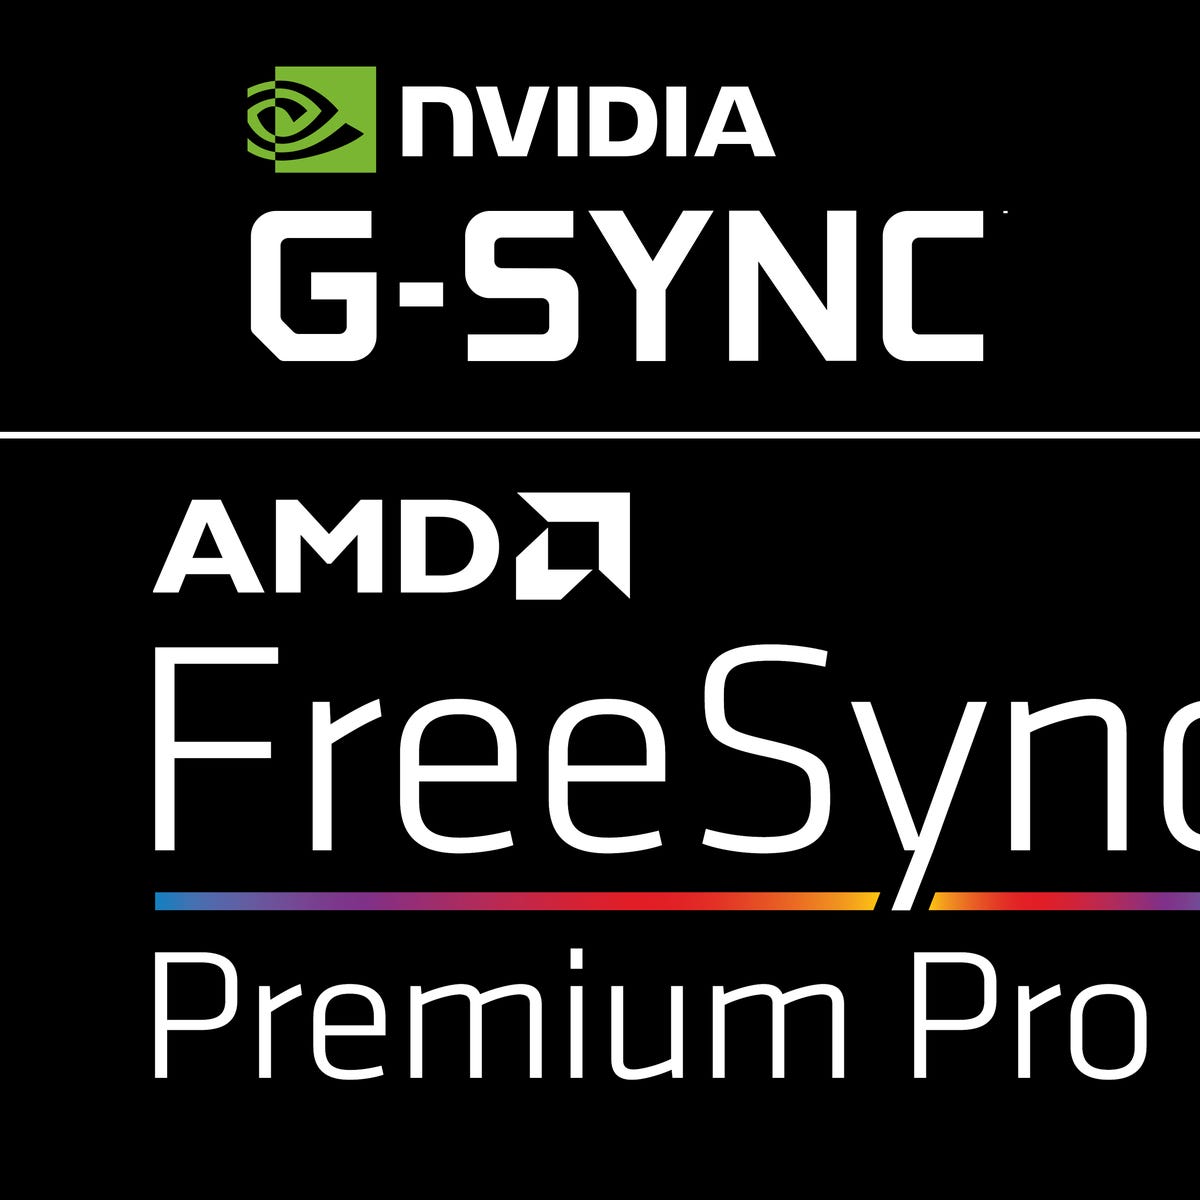 What are Nvidia G-Sync and AMD FreeSync and which I need? -